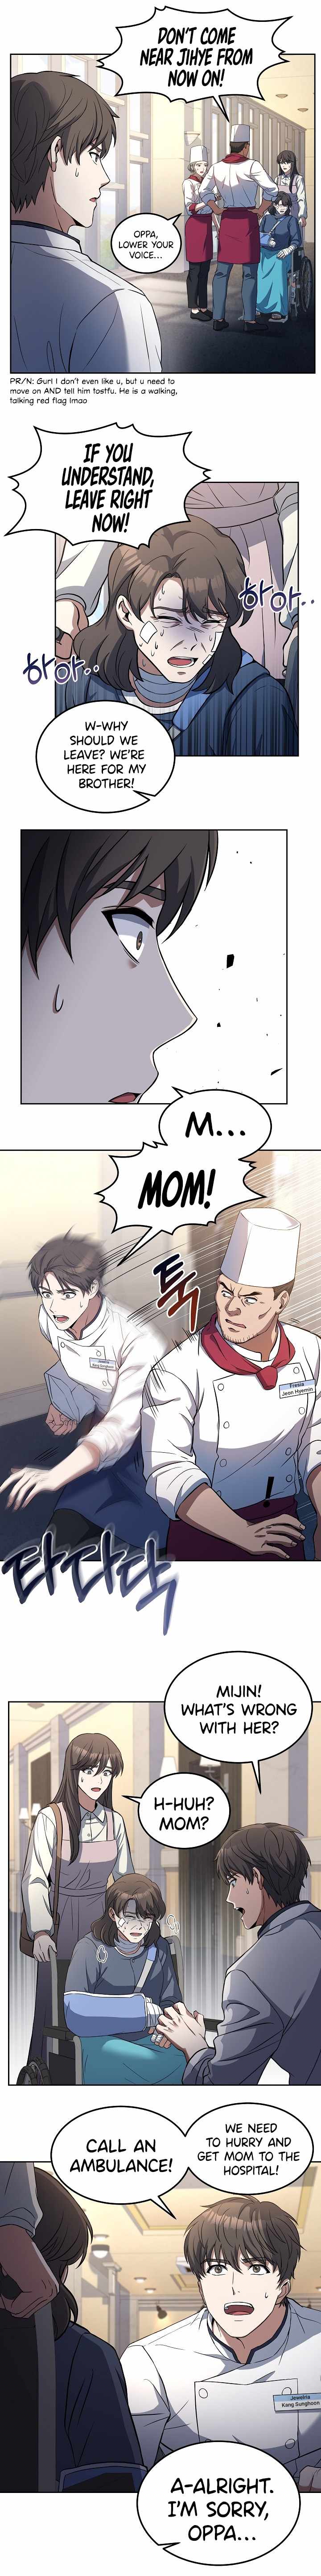 Youngest Chef from the 3rd Rate Hotel chapter 23